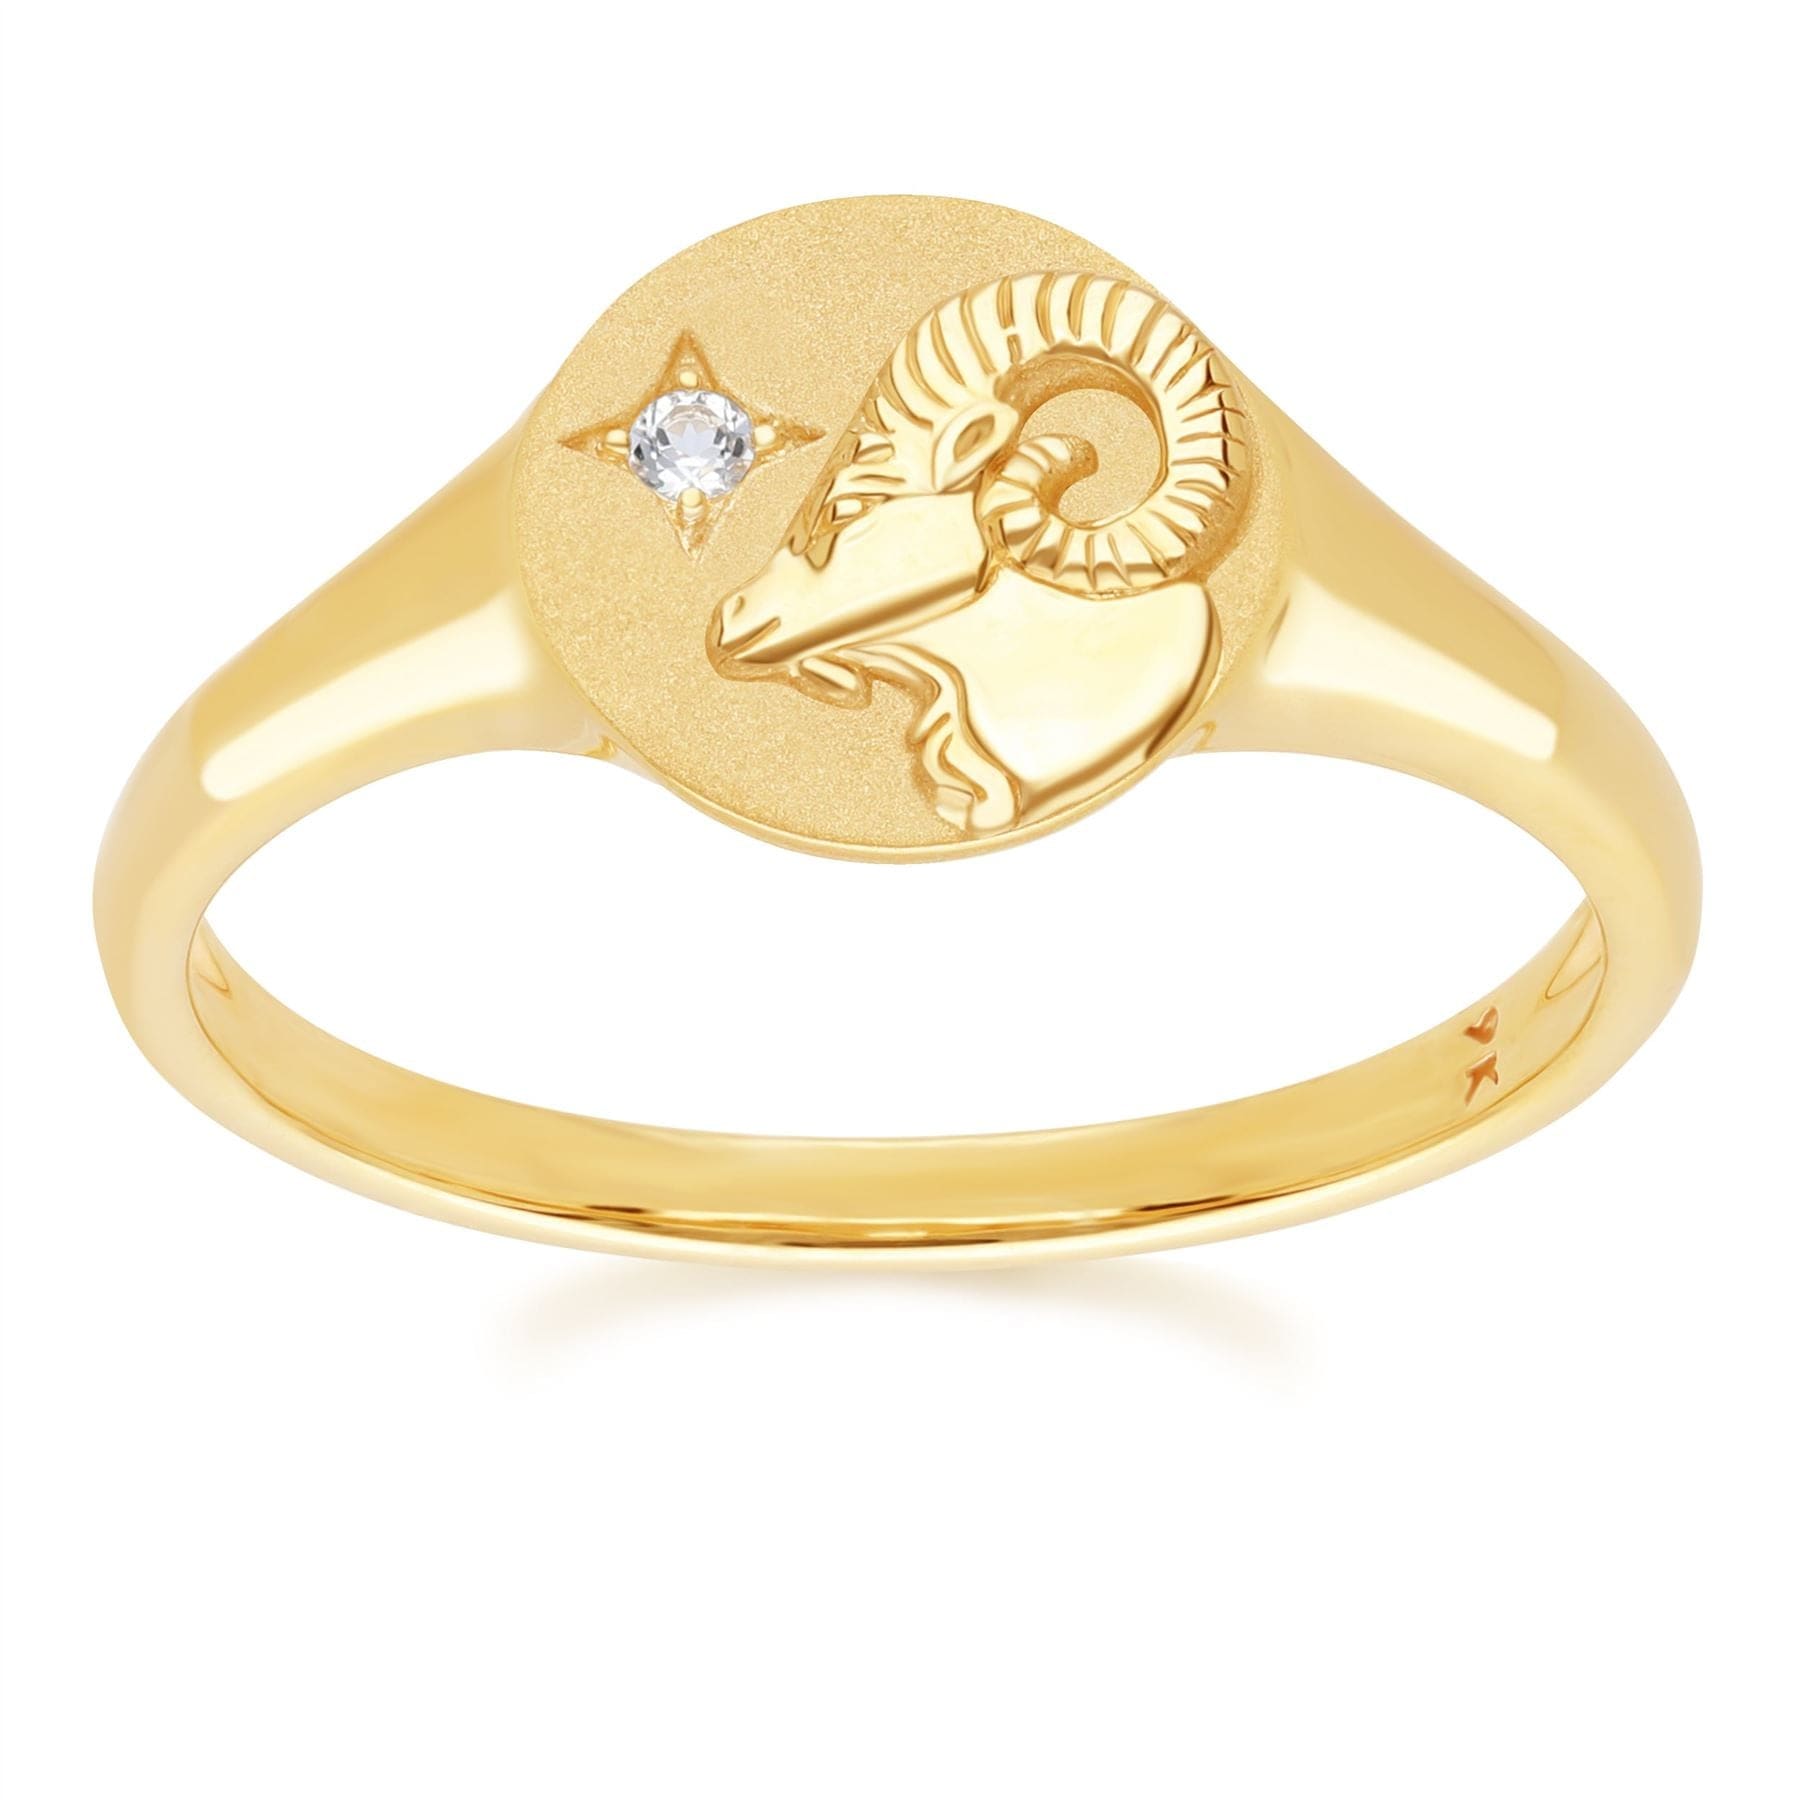 "Zodiac Topaz Aries Signet Ring In 9ct Yellow GoldFront  135R2082019